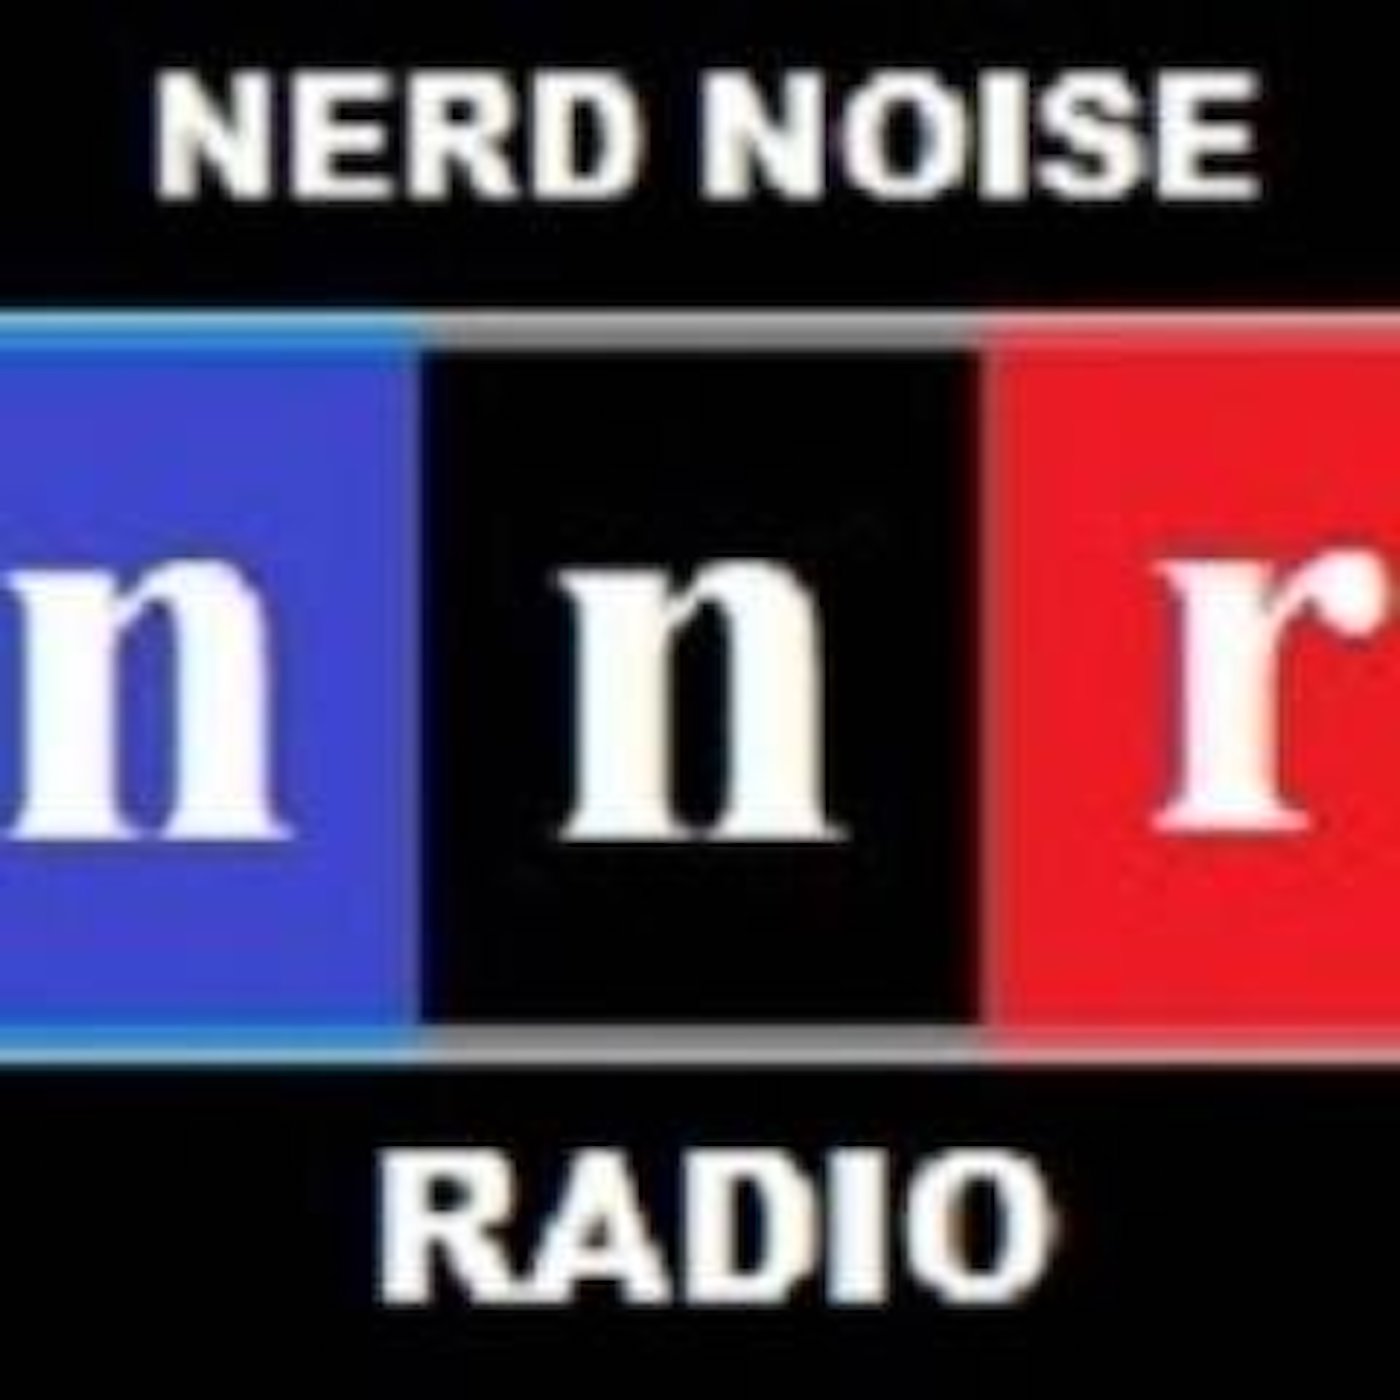 Nerd Noise Radio - Channel 1 Podcast - C1E12 - ”The Fiery Furniss”